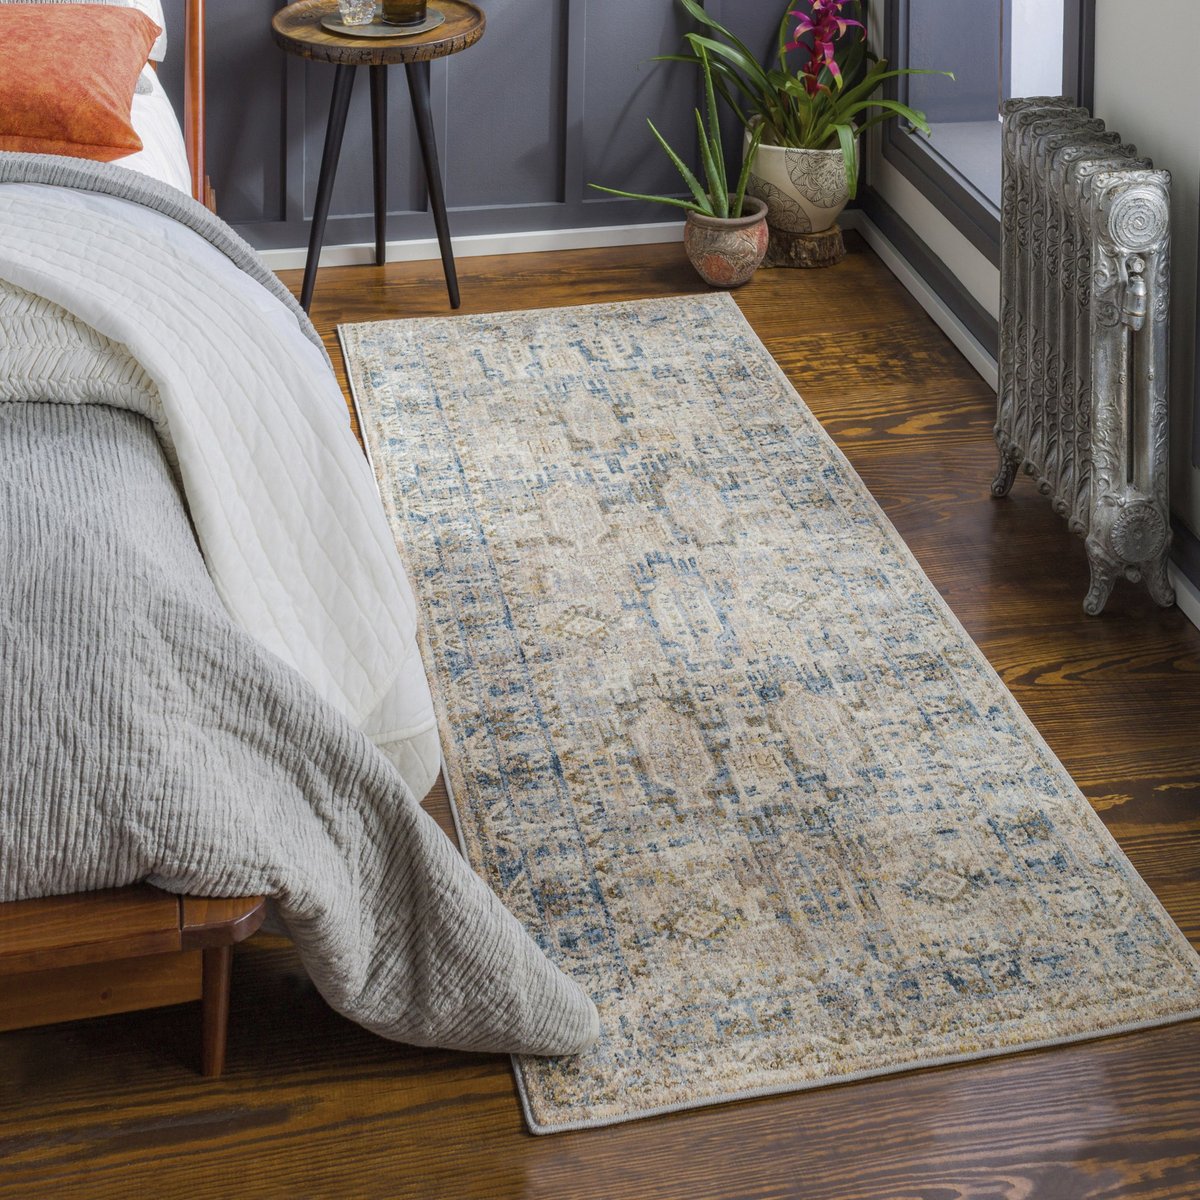 How to Place a Rug Under Your Bed: Expert Advice